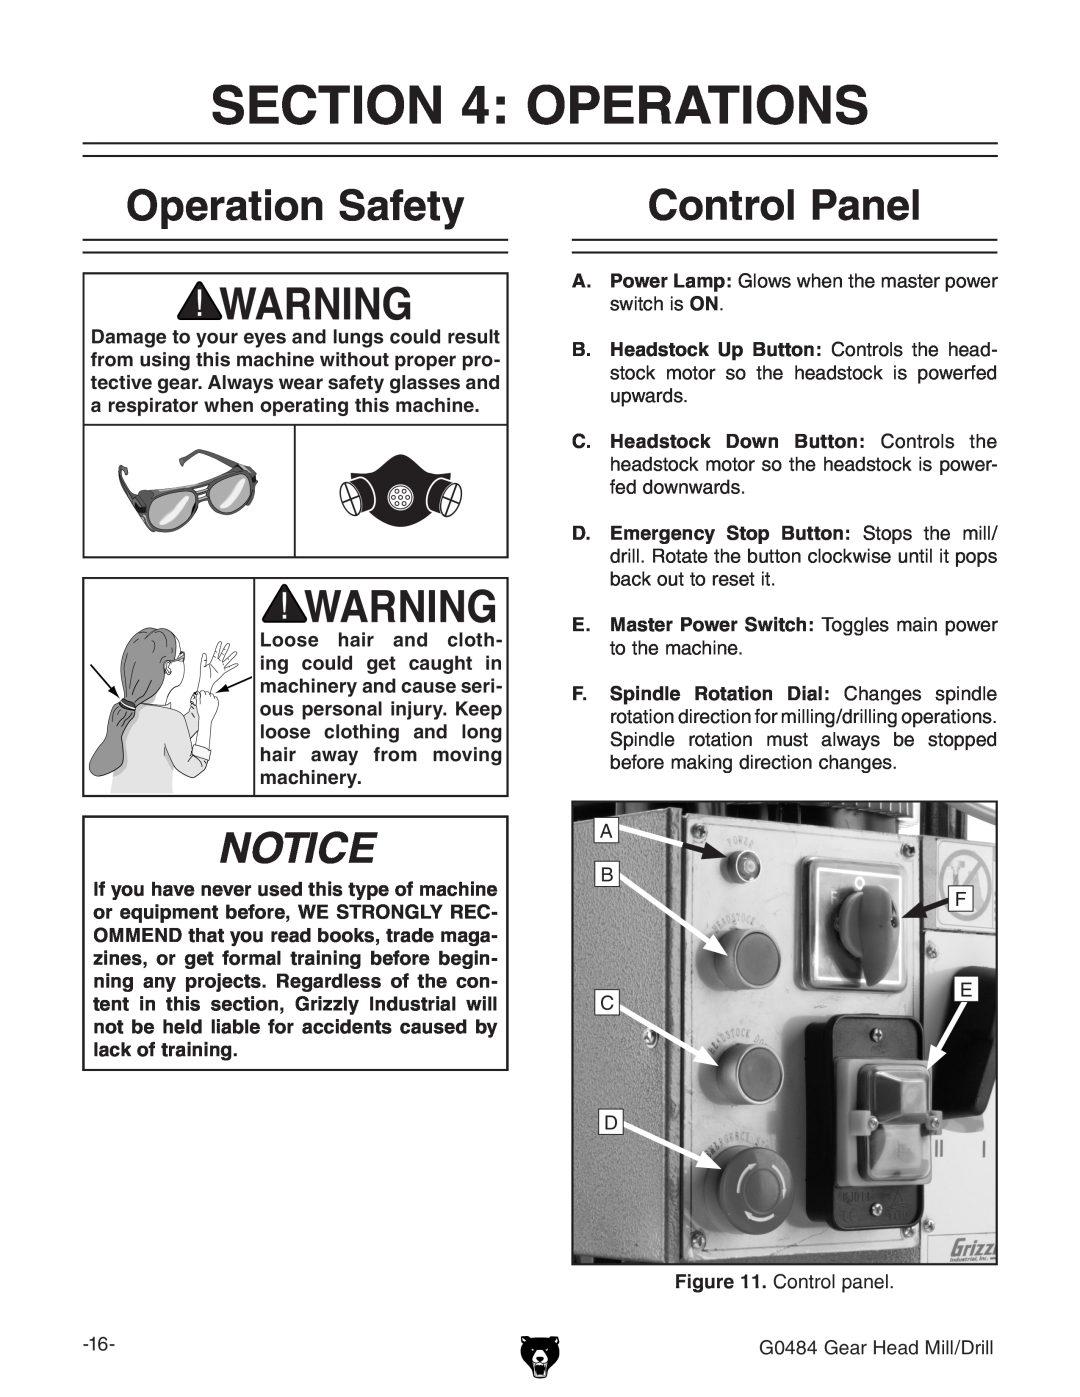 Grizzly G0484 owner manual Operations, Operation Safety, Control Panel 